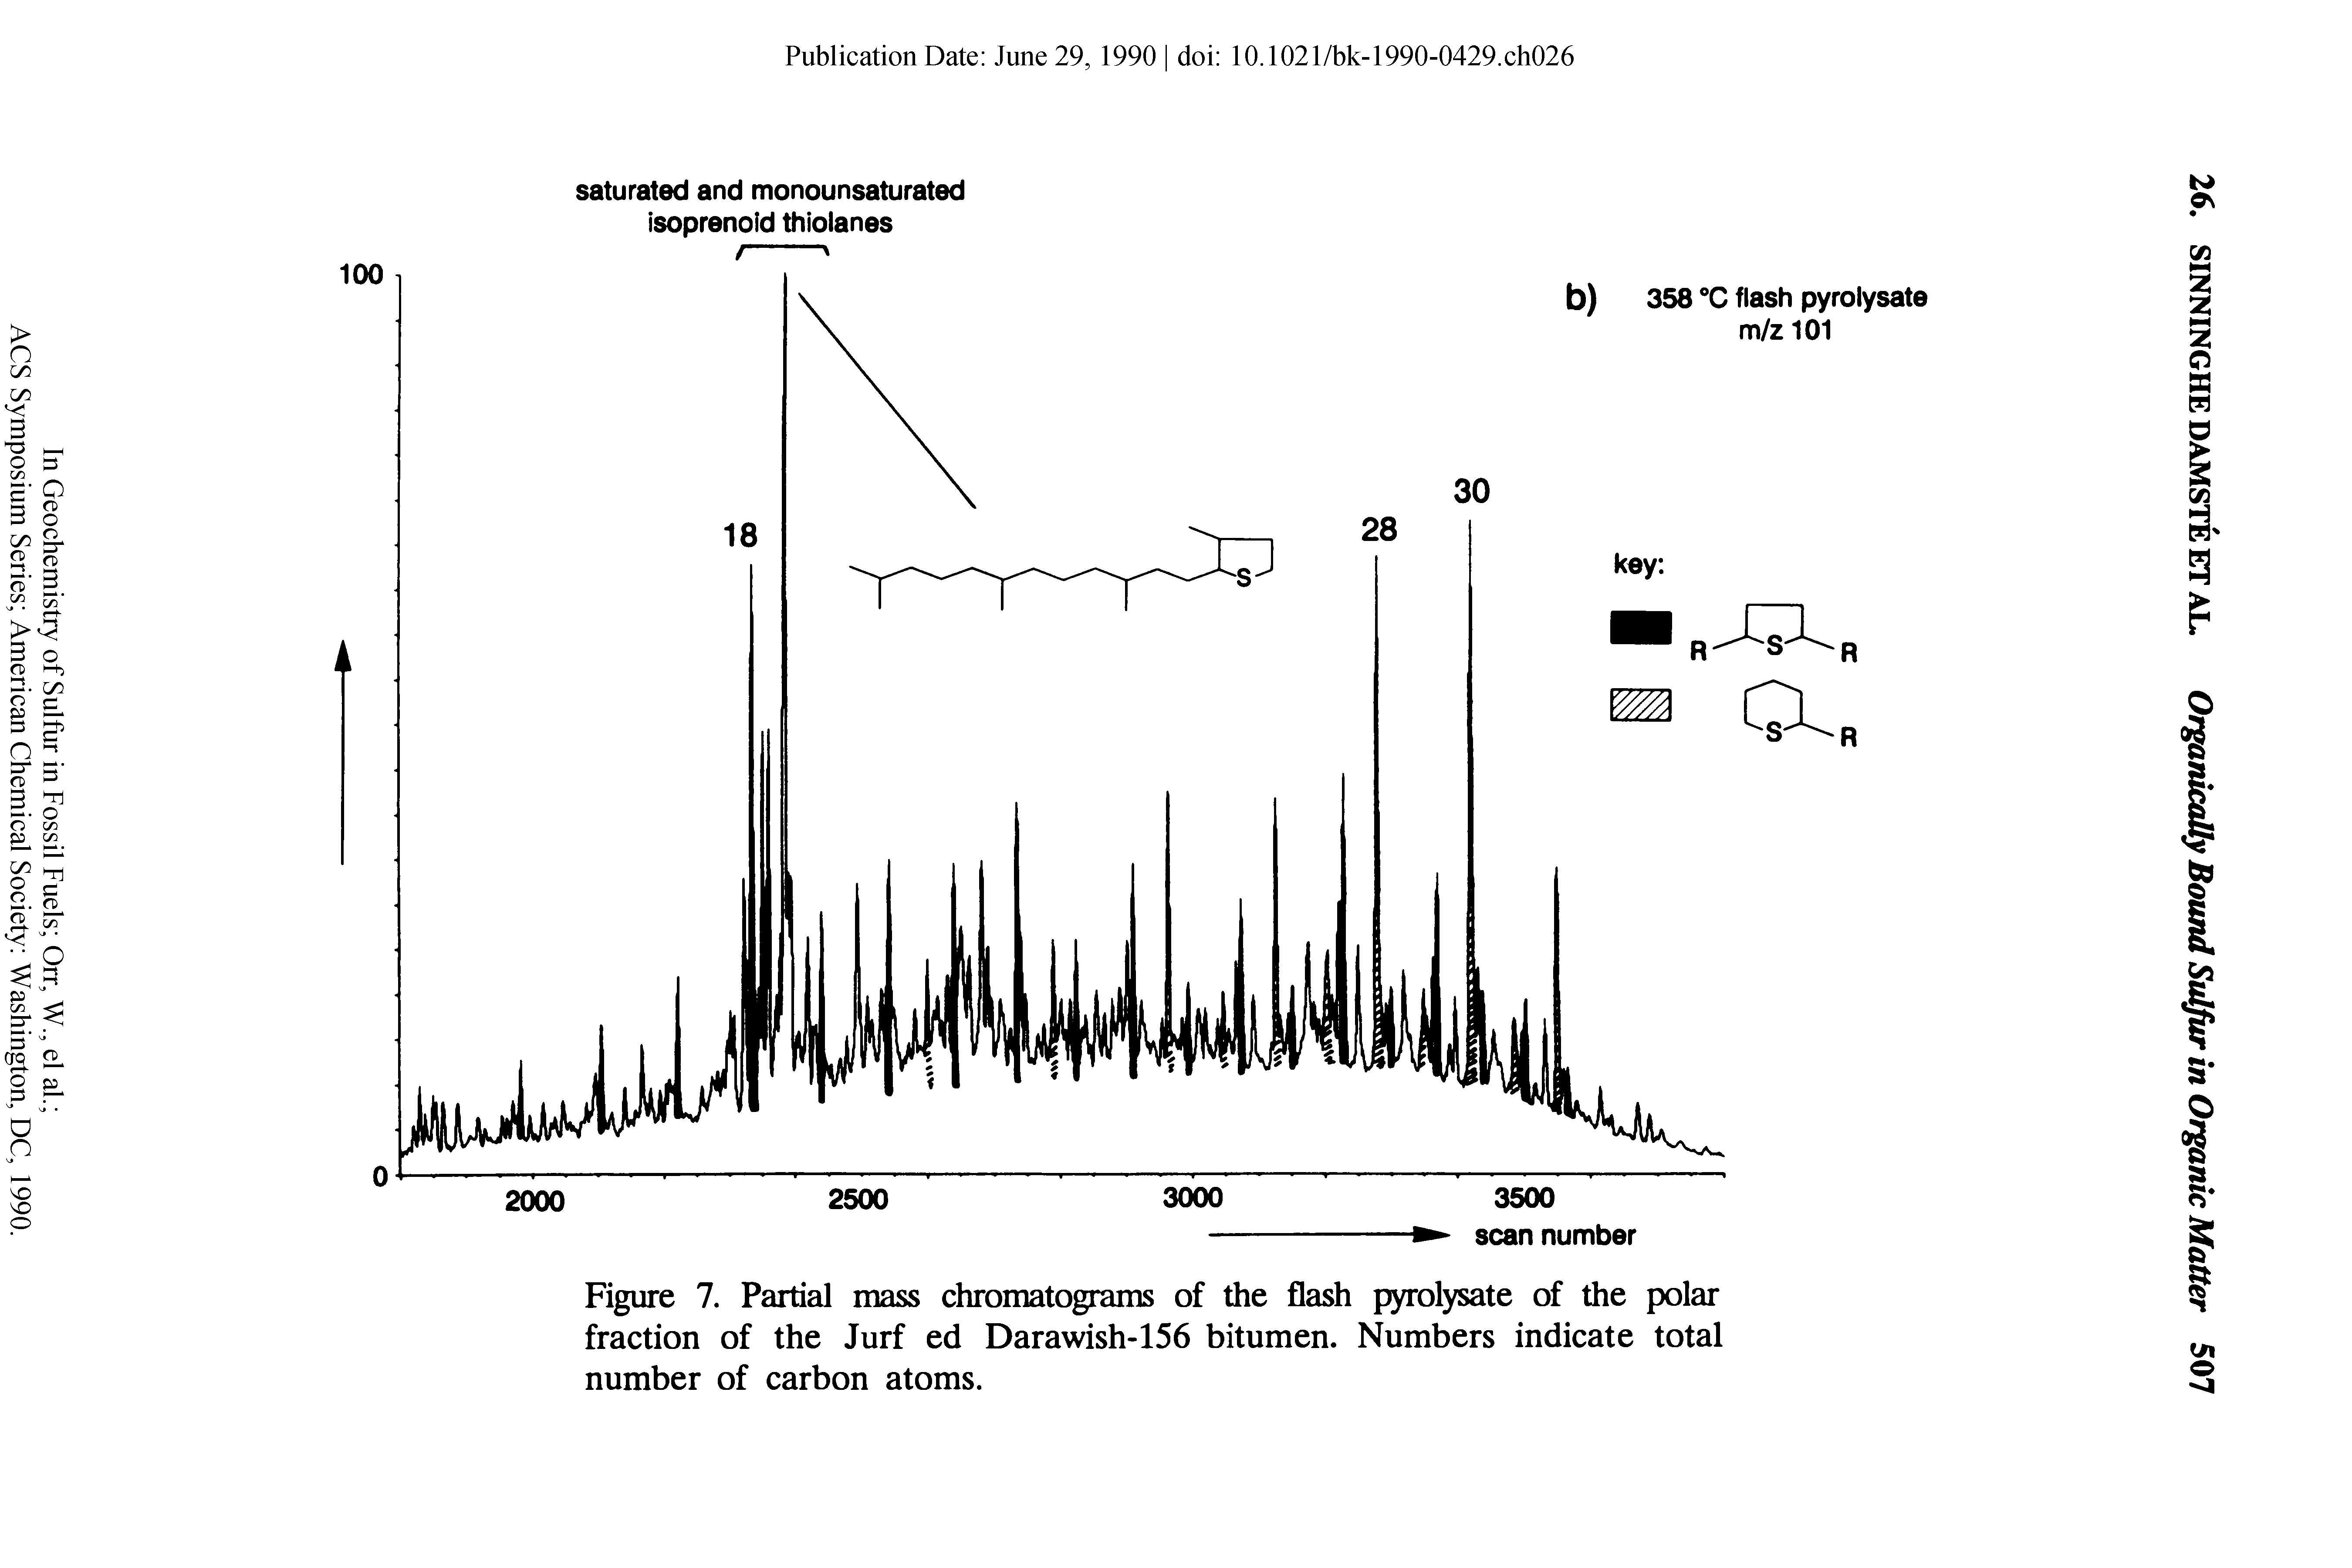 Figure 7. Partial mass chromatograms of the flash pyrolysate of the polar fraction of the Jurf ed Darawish-156 bitumen. Numbers indicate total number of carbon atoms.